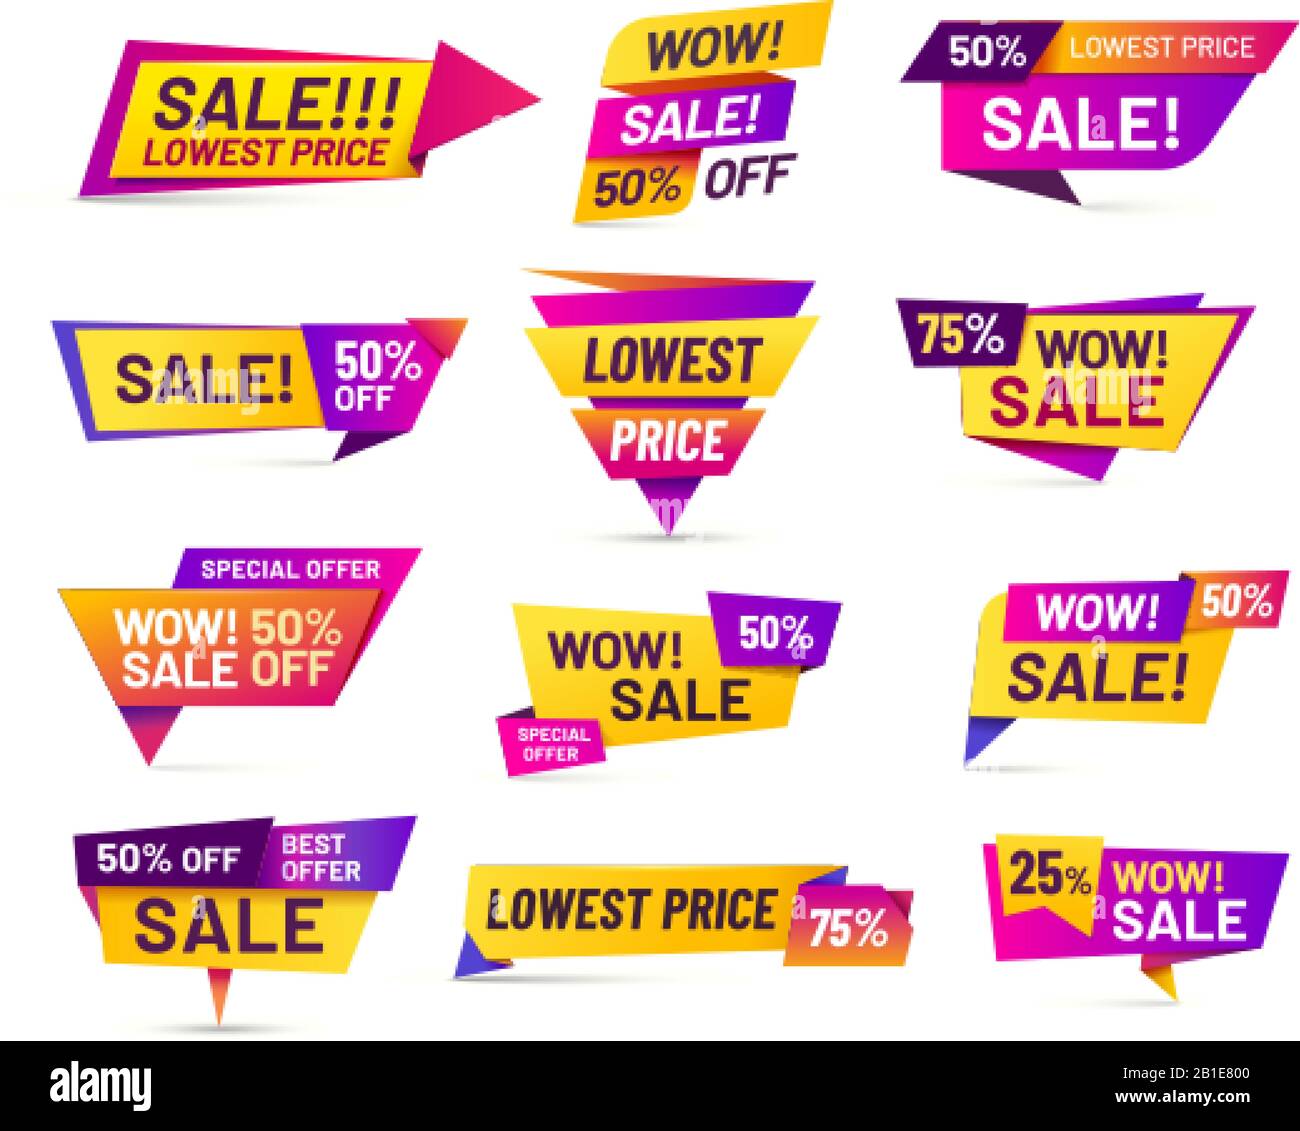 Set of retail sale tags. Stickers best offer price and big sale pricing tag  badge design. Limited sales offer label or store discount banner card  isolated. Shopping coupon. Vector illustration.